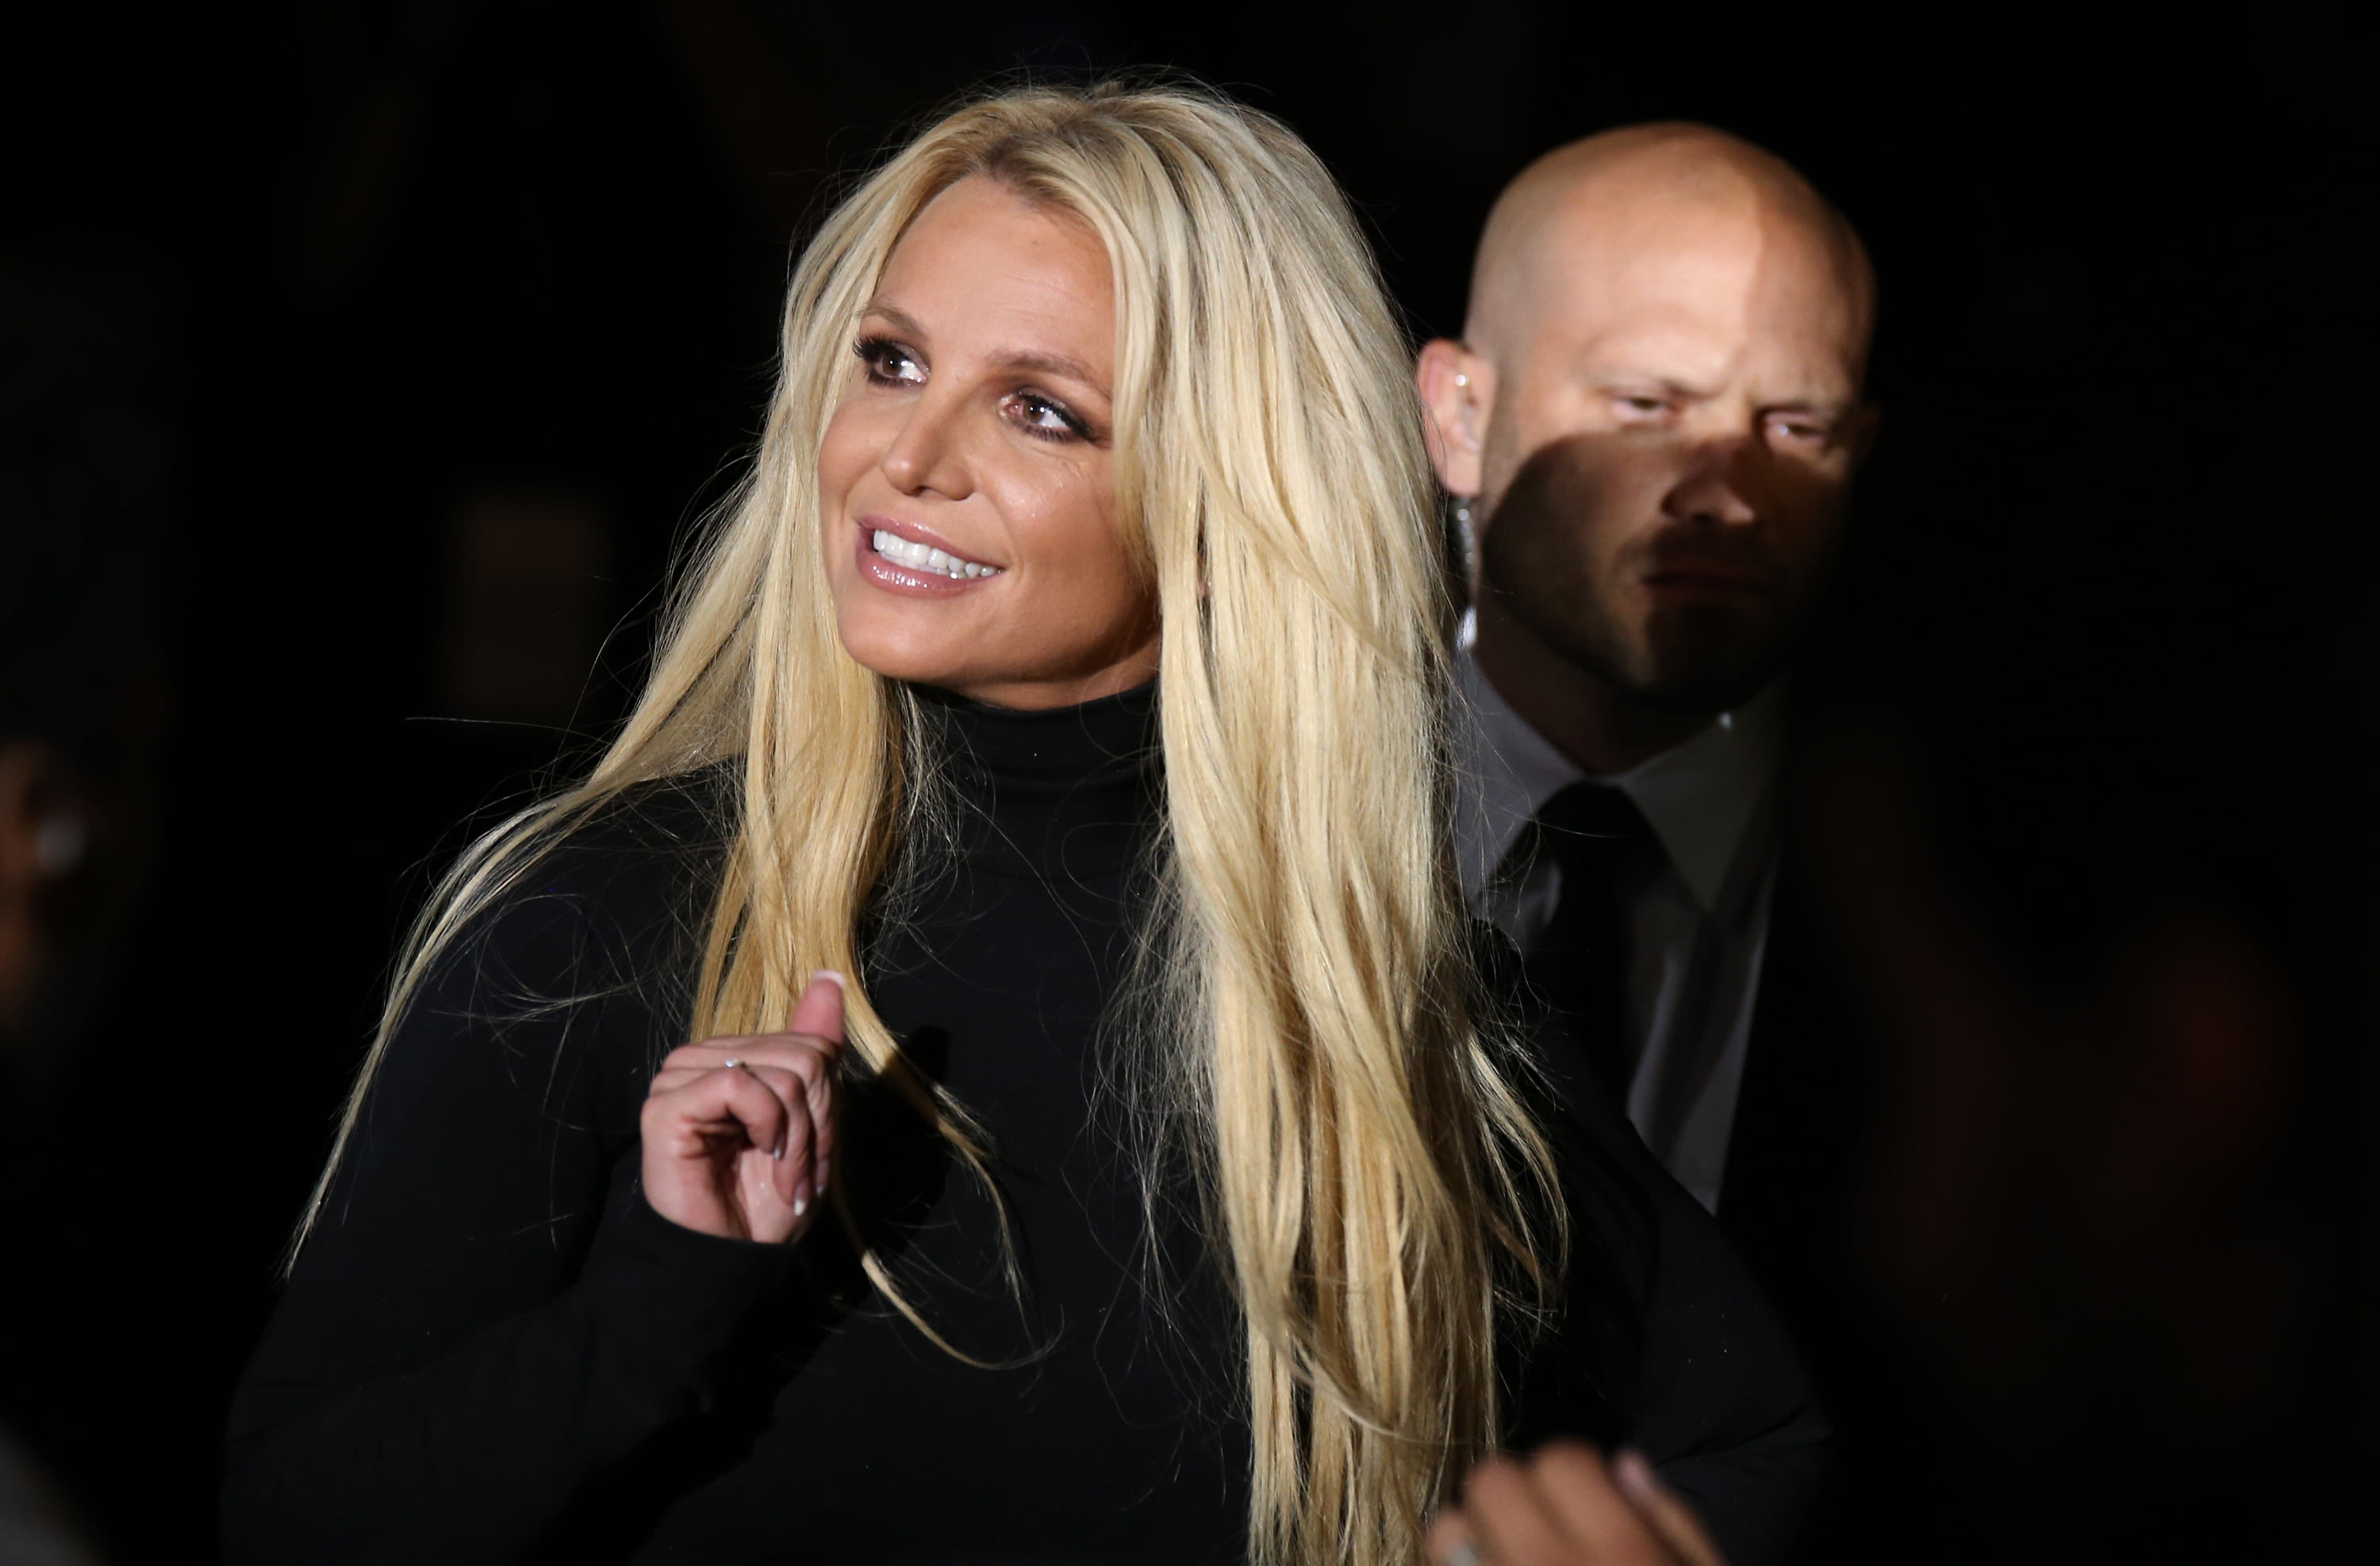 Britney Spears Biopic Rights Purchased: Details on the Movie Based on ‘The Woman in Me’